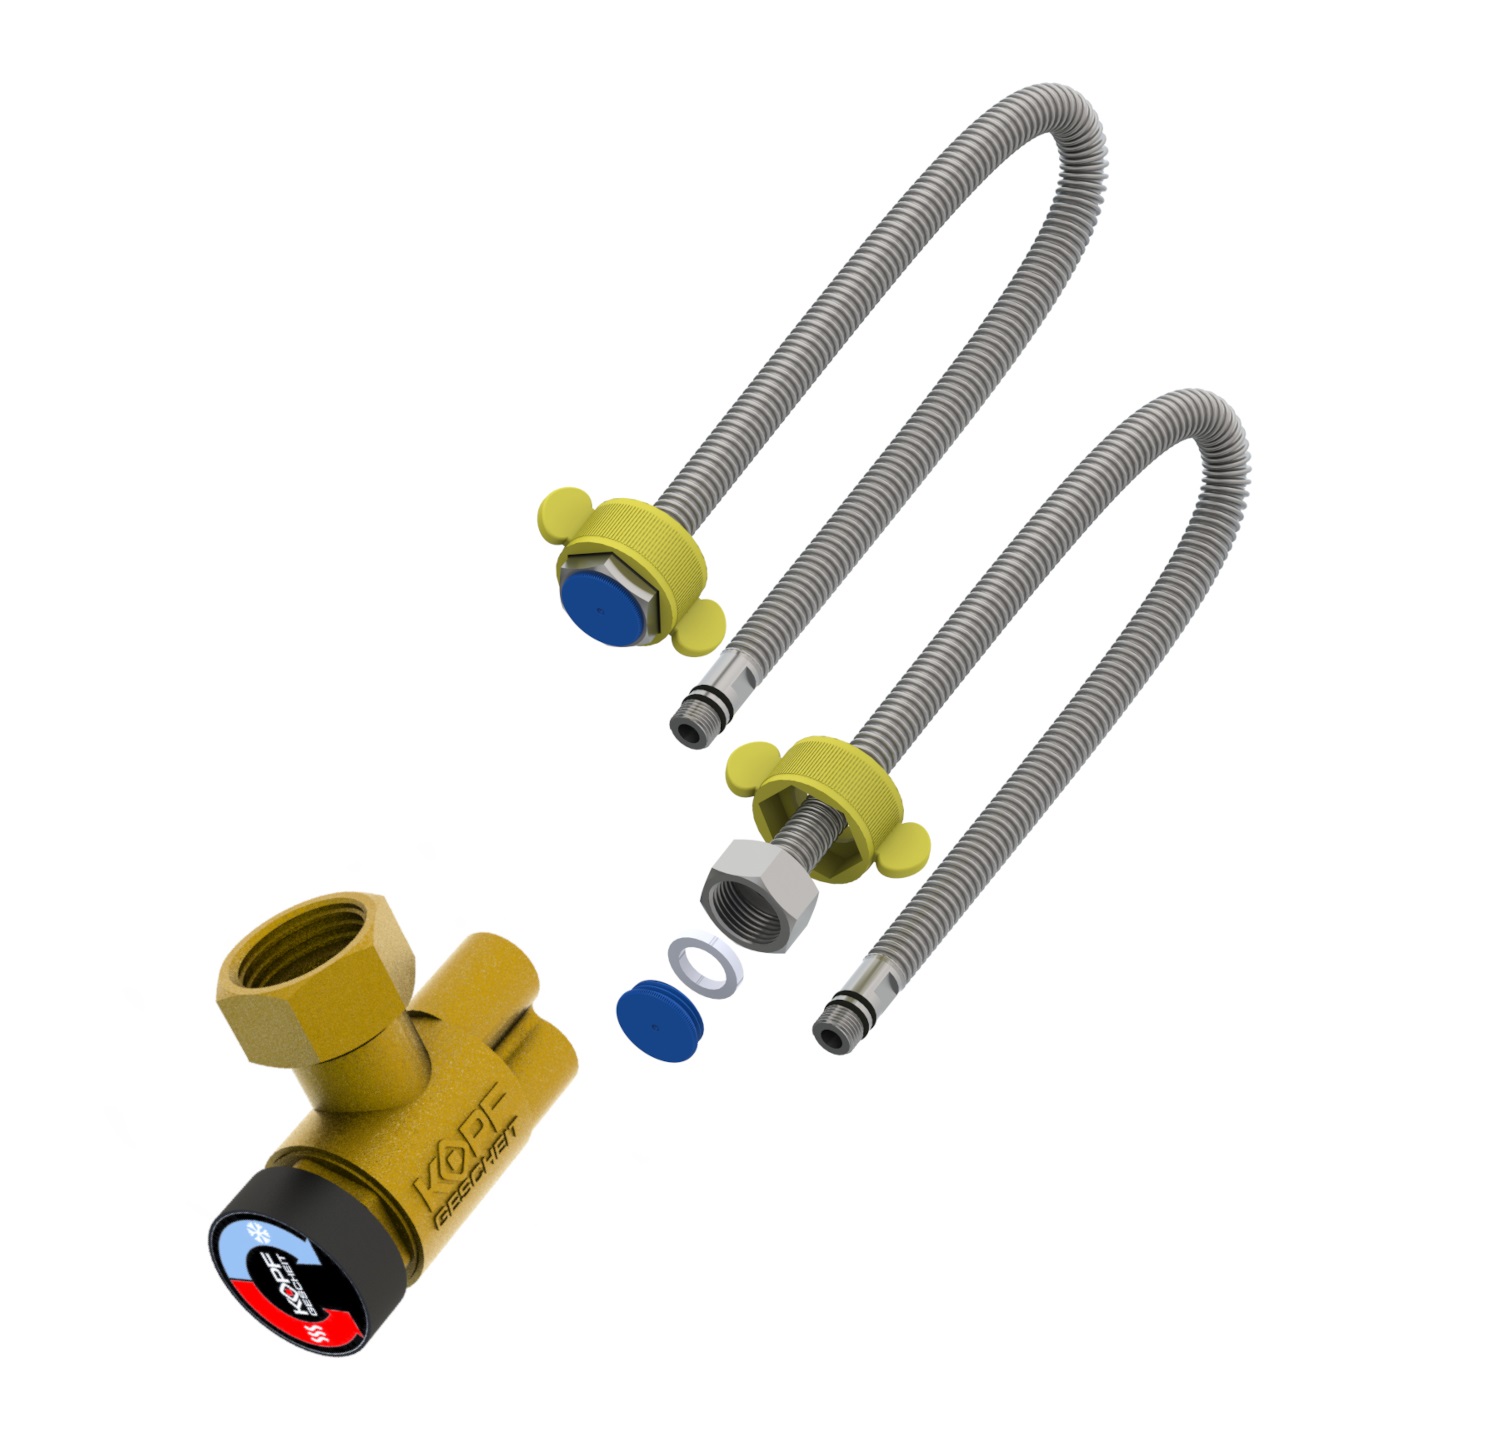 Kopfgescheit KG535 Thermal mixing valve and bellows connection kit